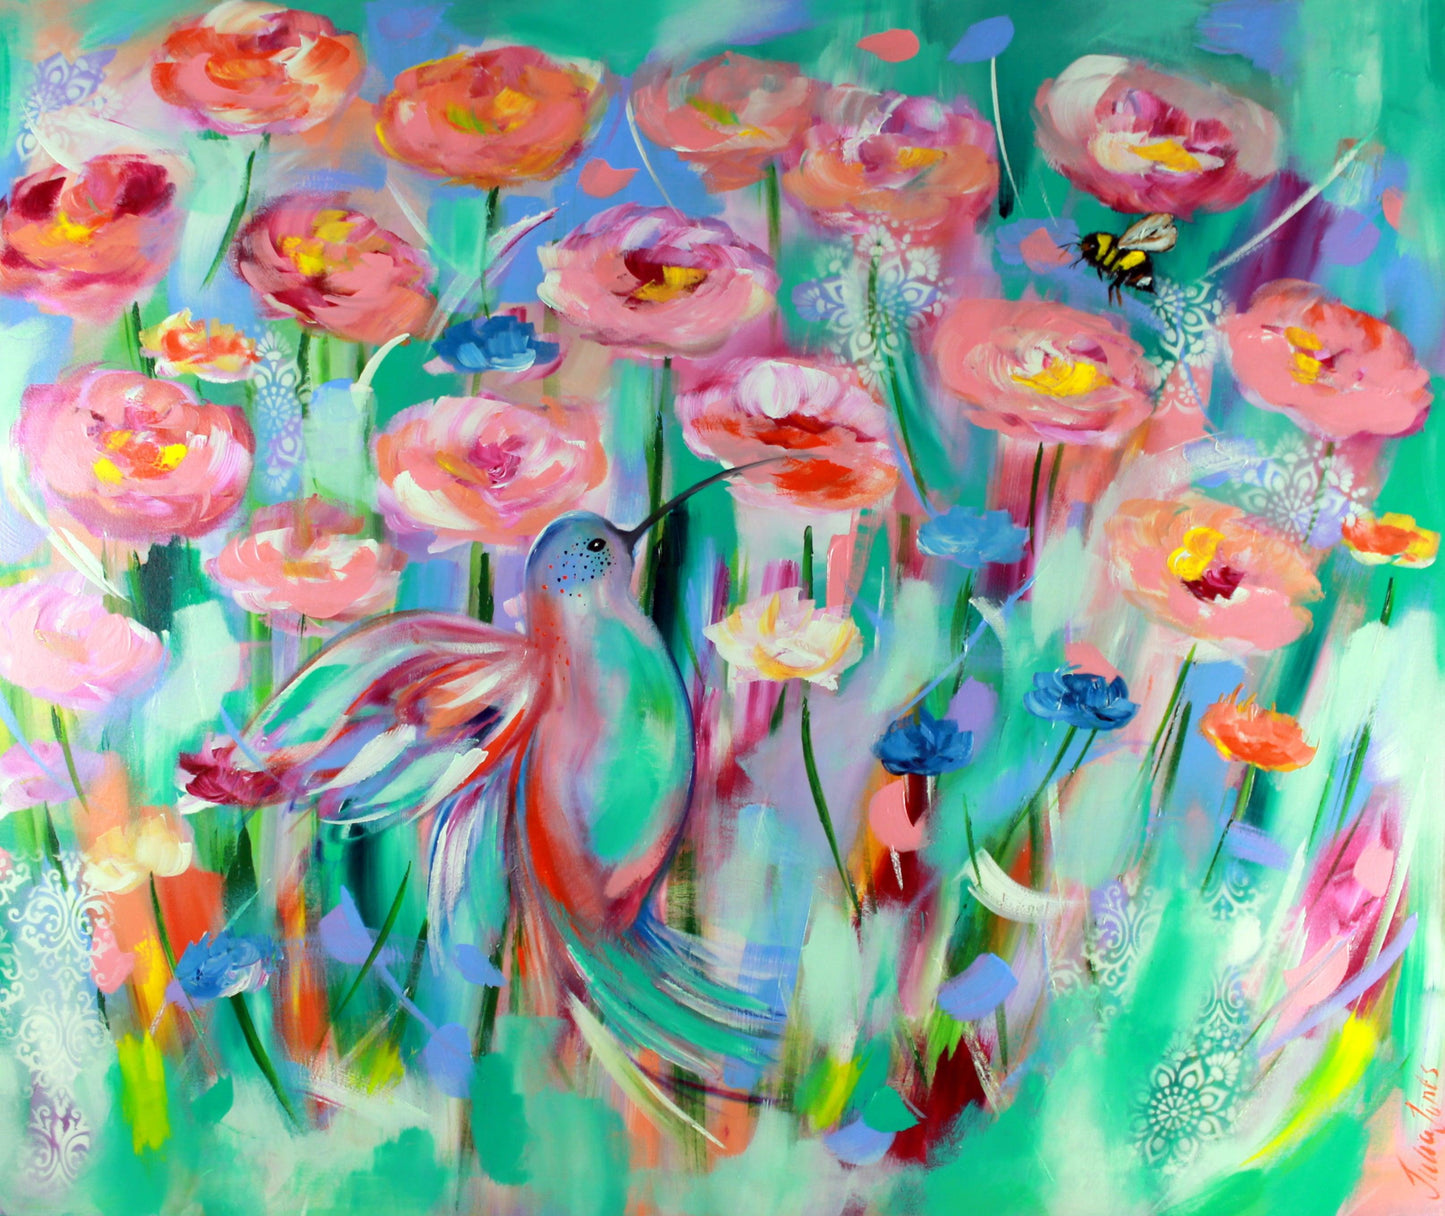 Hummingbird Love - 1.2 x 1m - Original Artwork - Available by Commission